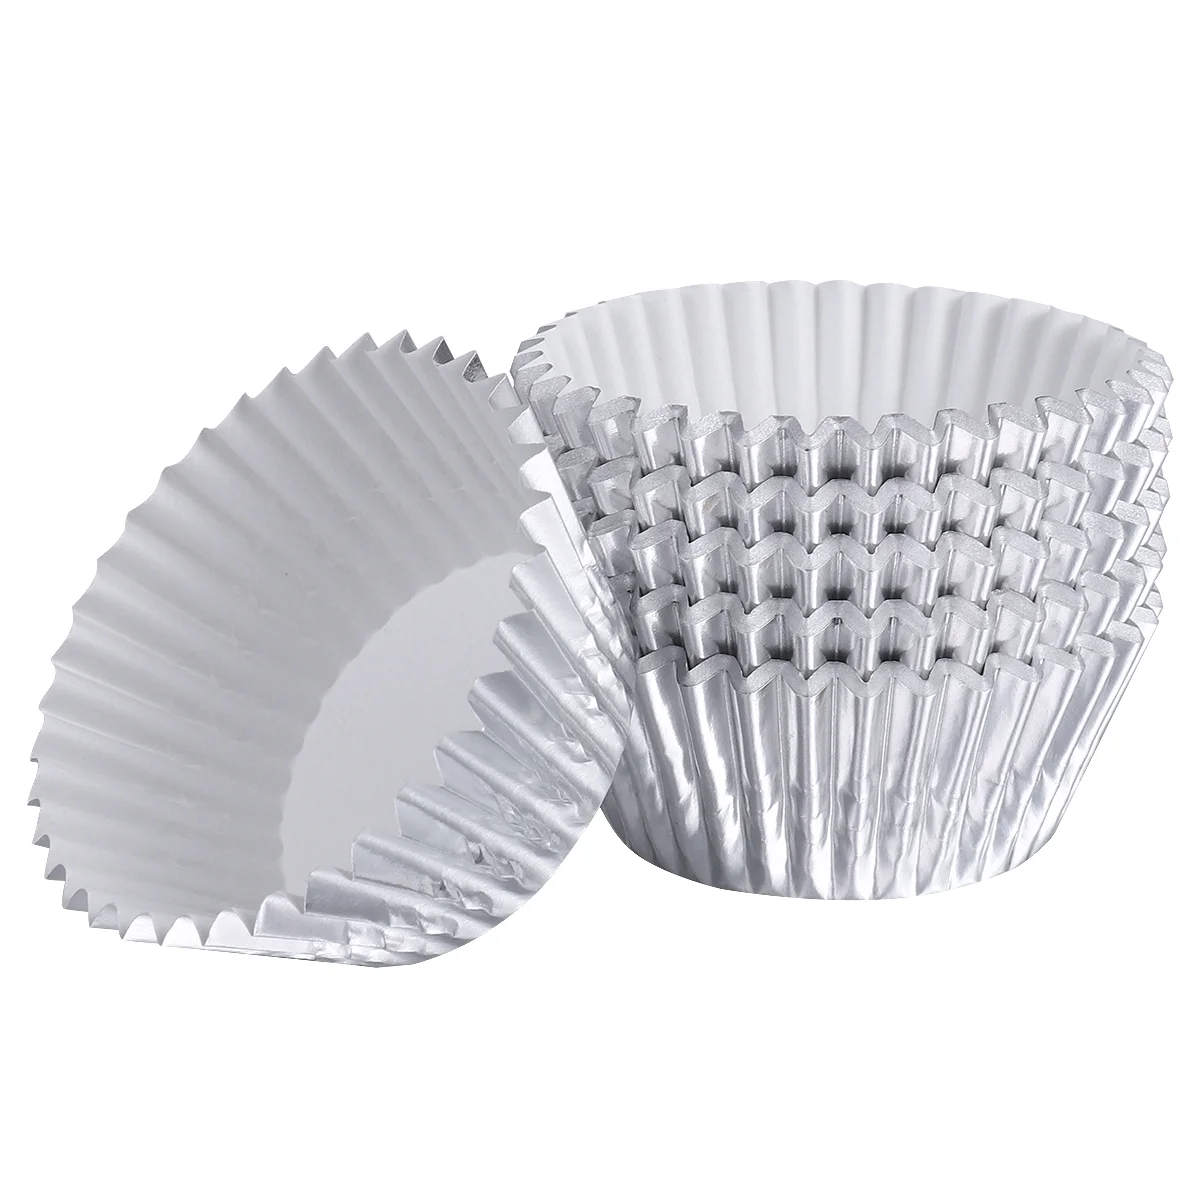 

100pcs Standard Foil Cupcake Liners, Aluminum Muffin Wrappers, Thickened Foil Cake Wrapper for Party Supplies Decoration